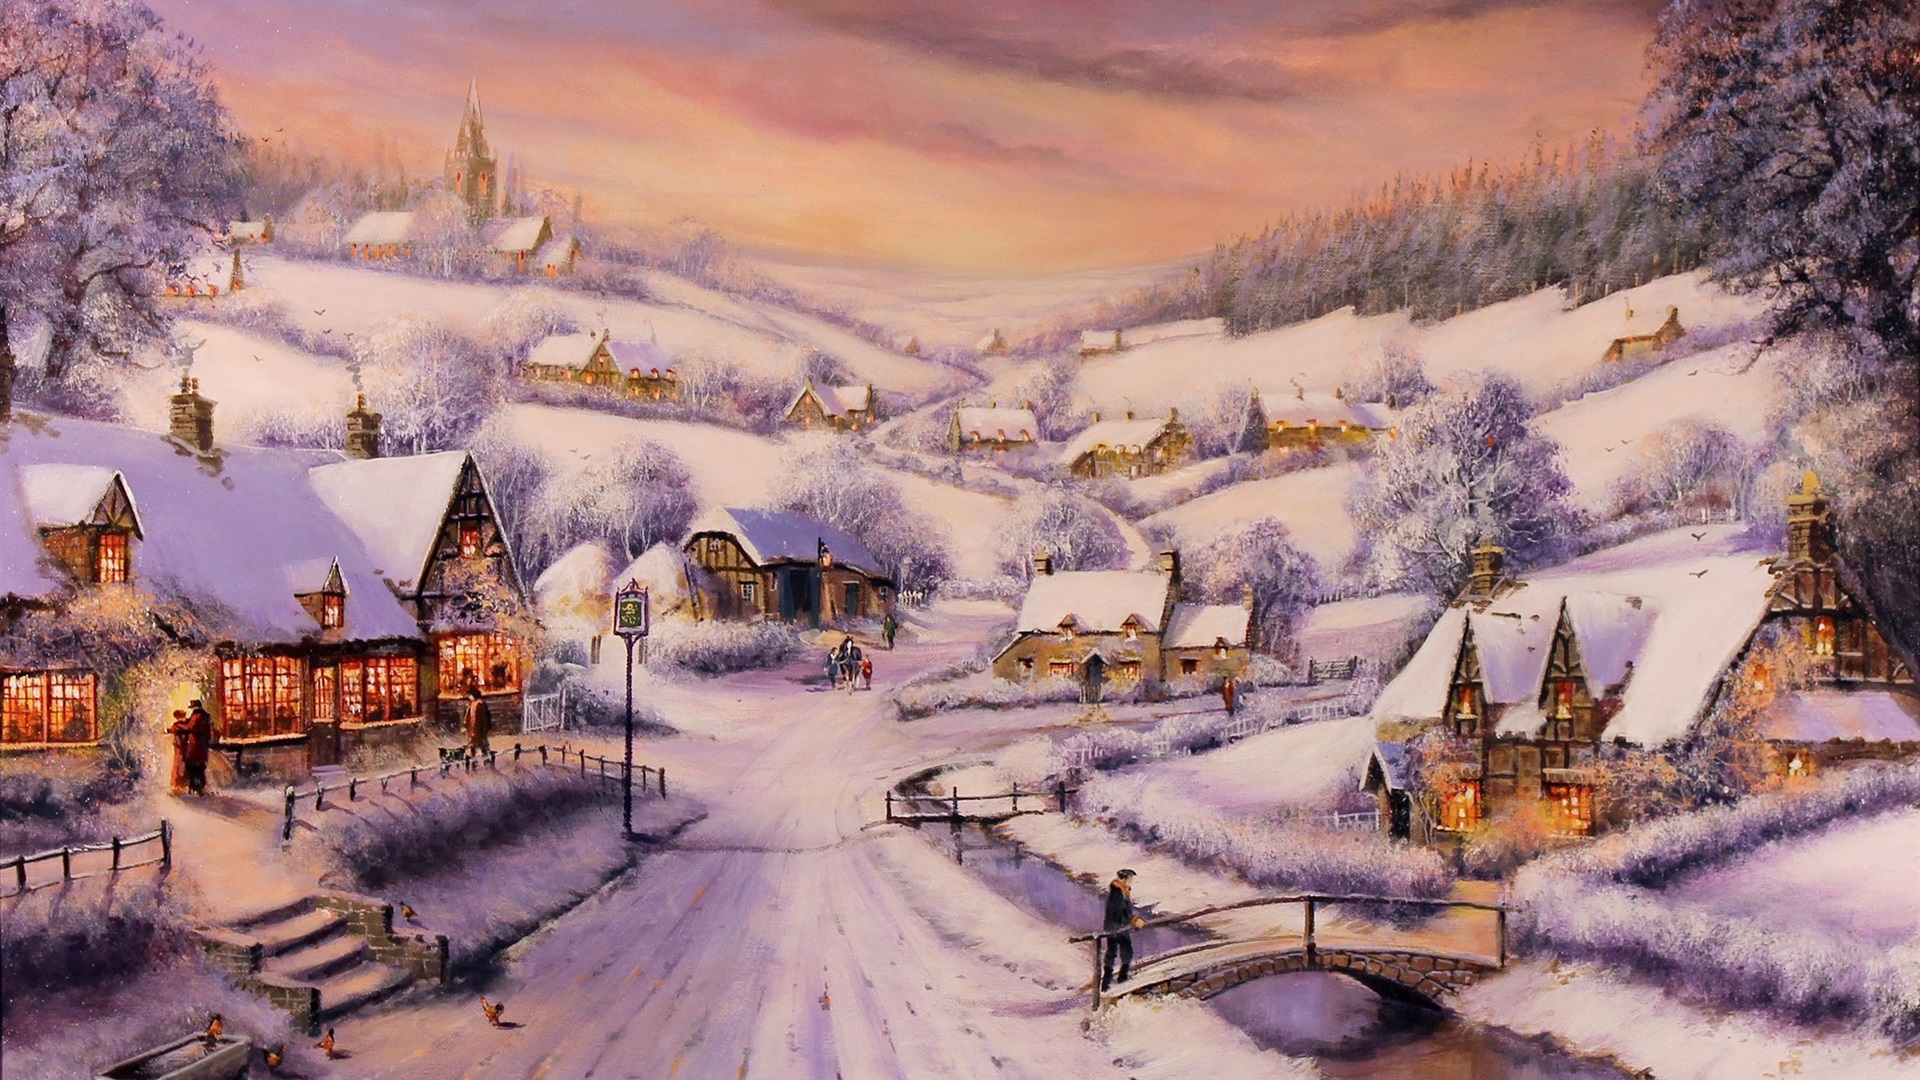 General 1920x1080 painting winter snow house stairs bridge people road trees clouds landscape street light city lights idyllic